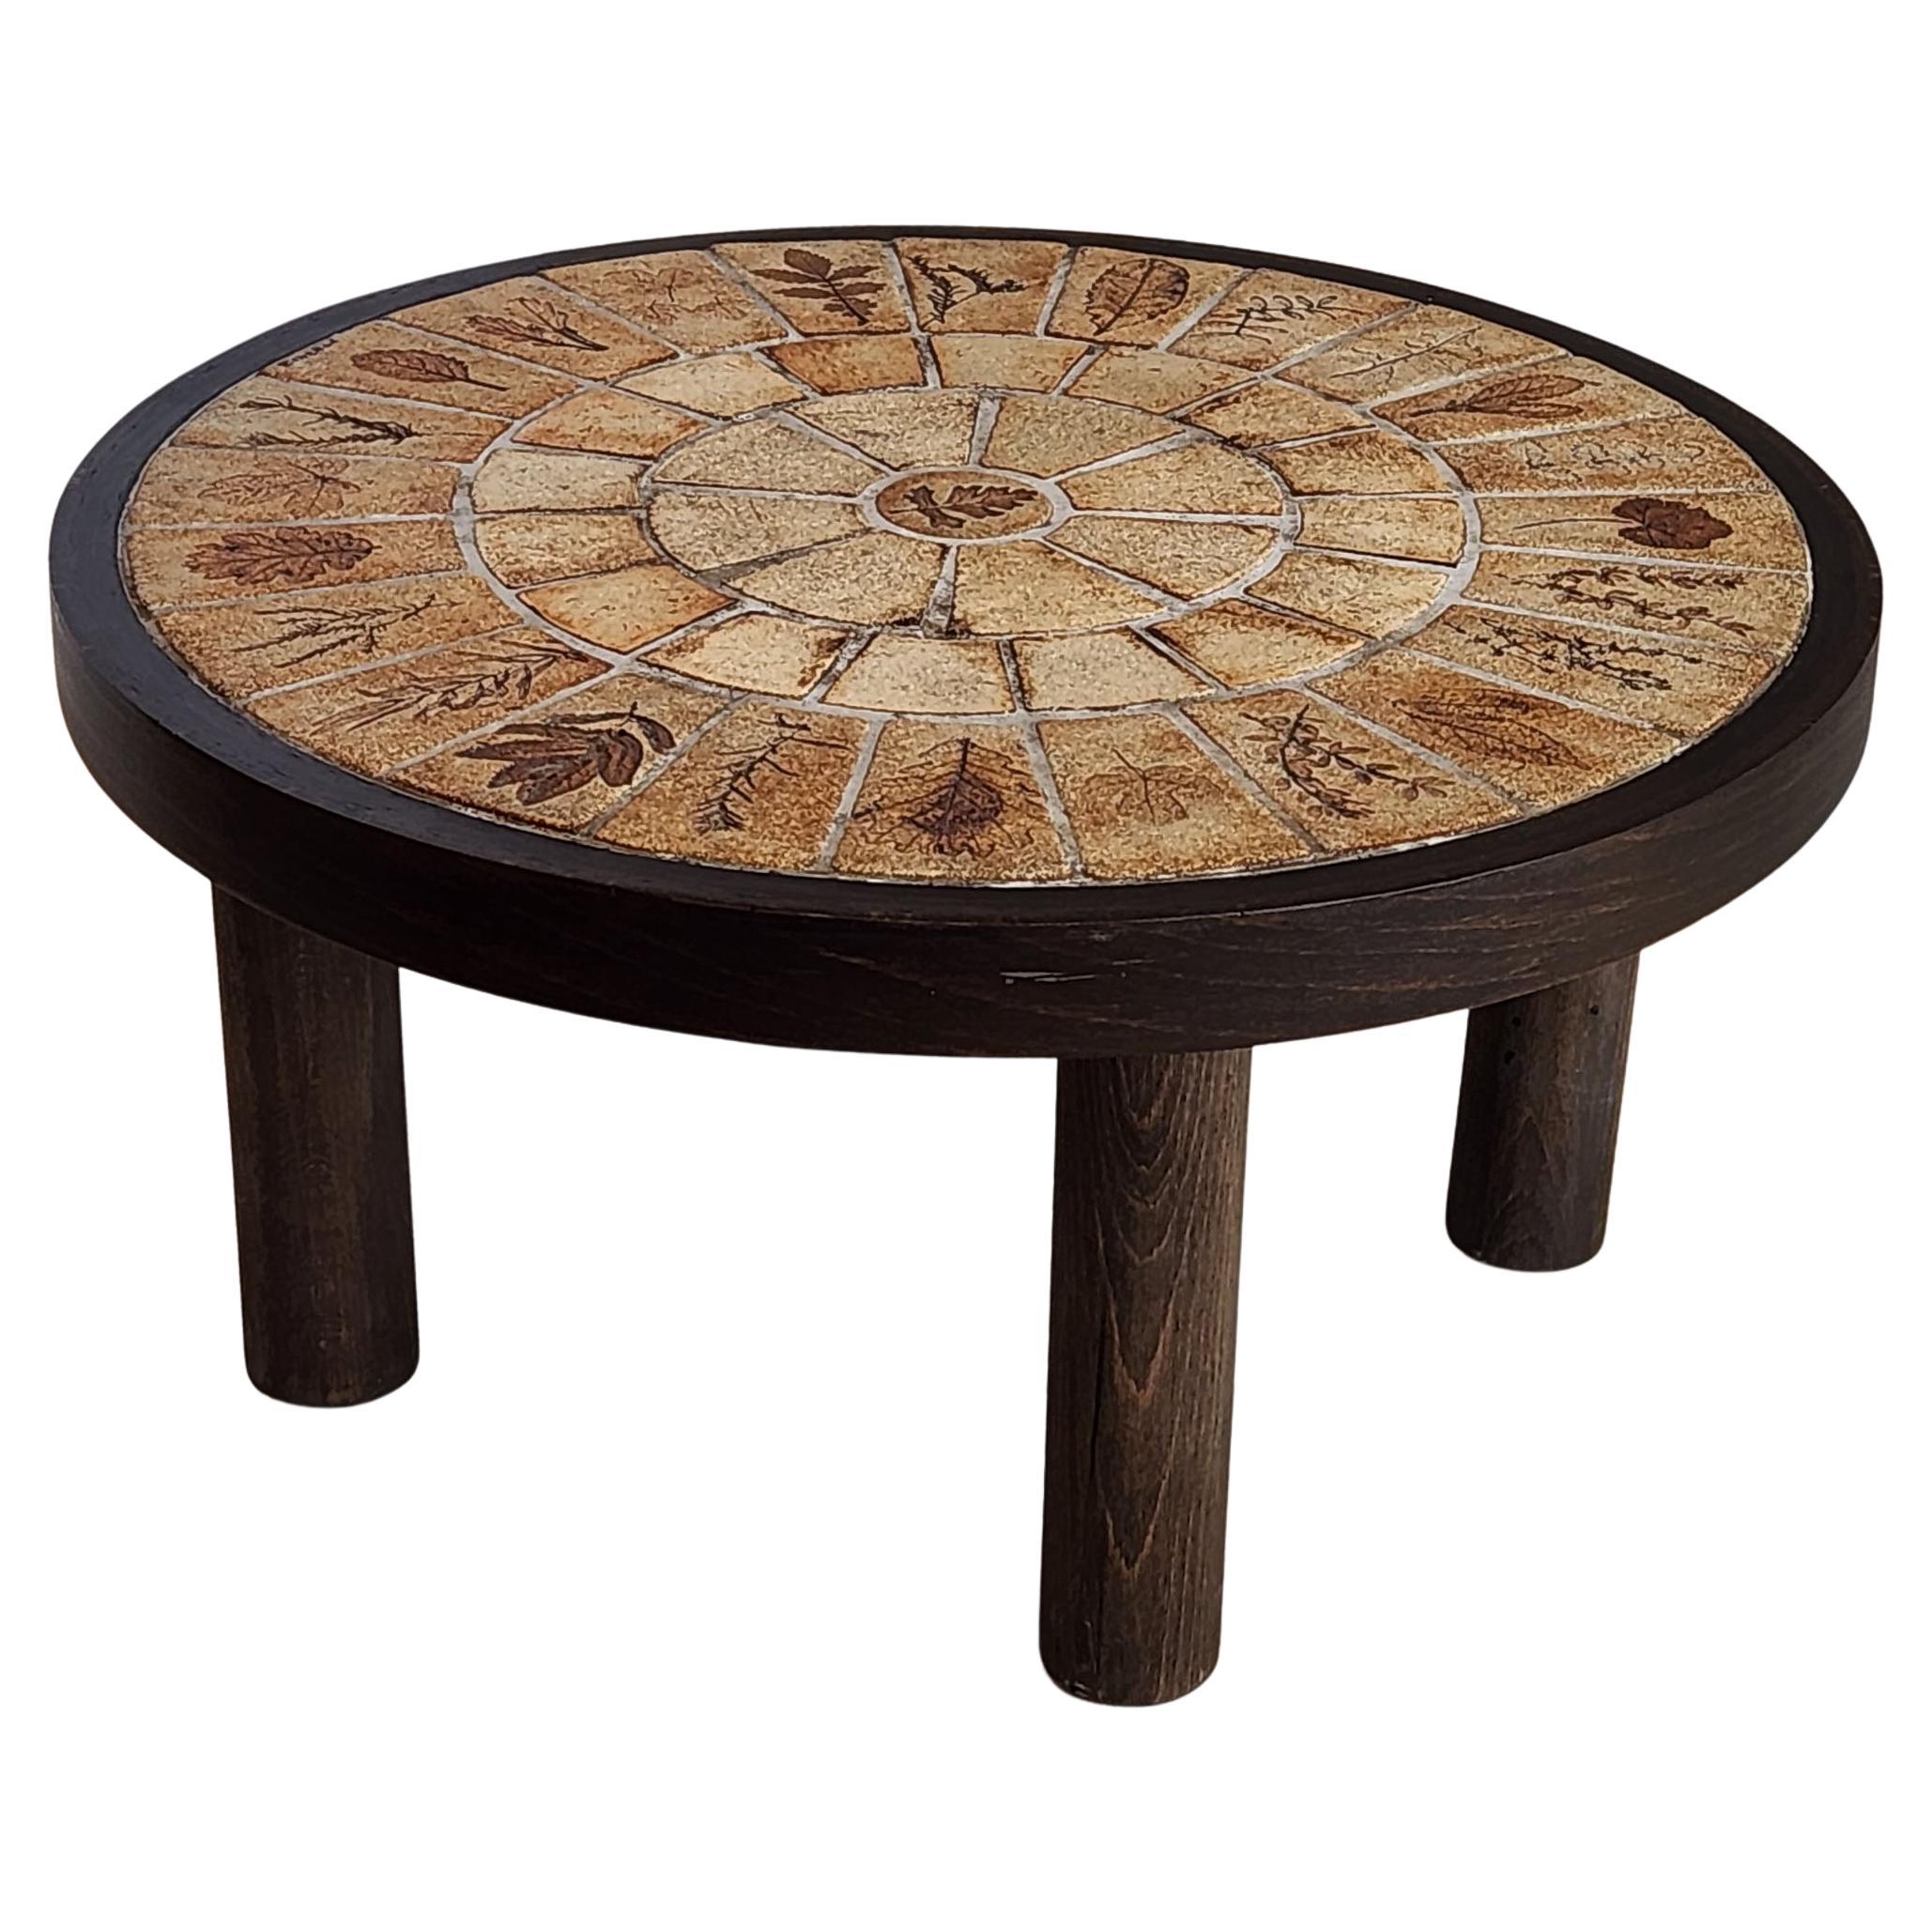 Roger Capron - Vintage Round Side Table with Garrigue Tiles on Wood Frame 